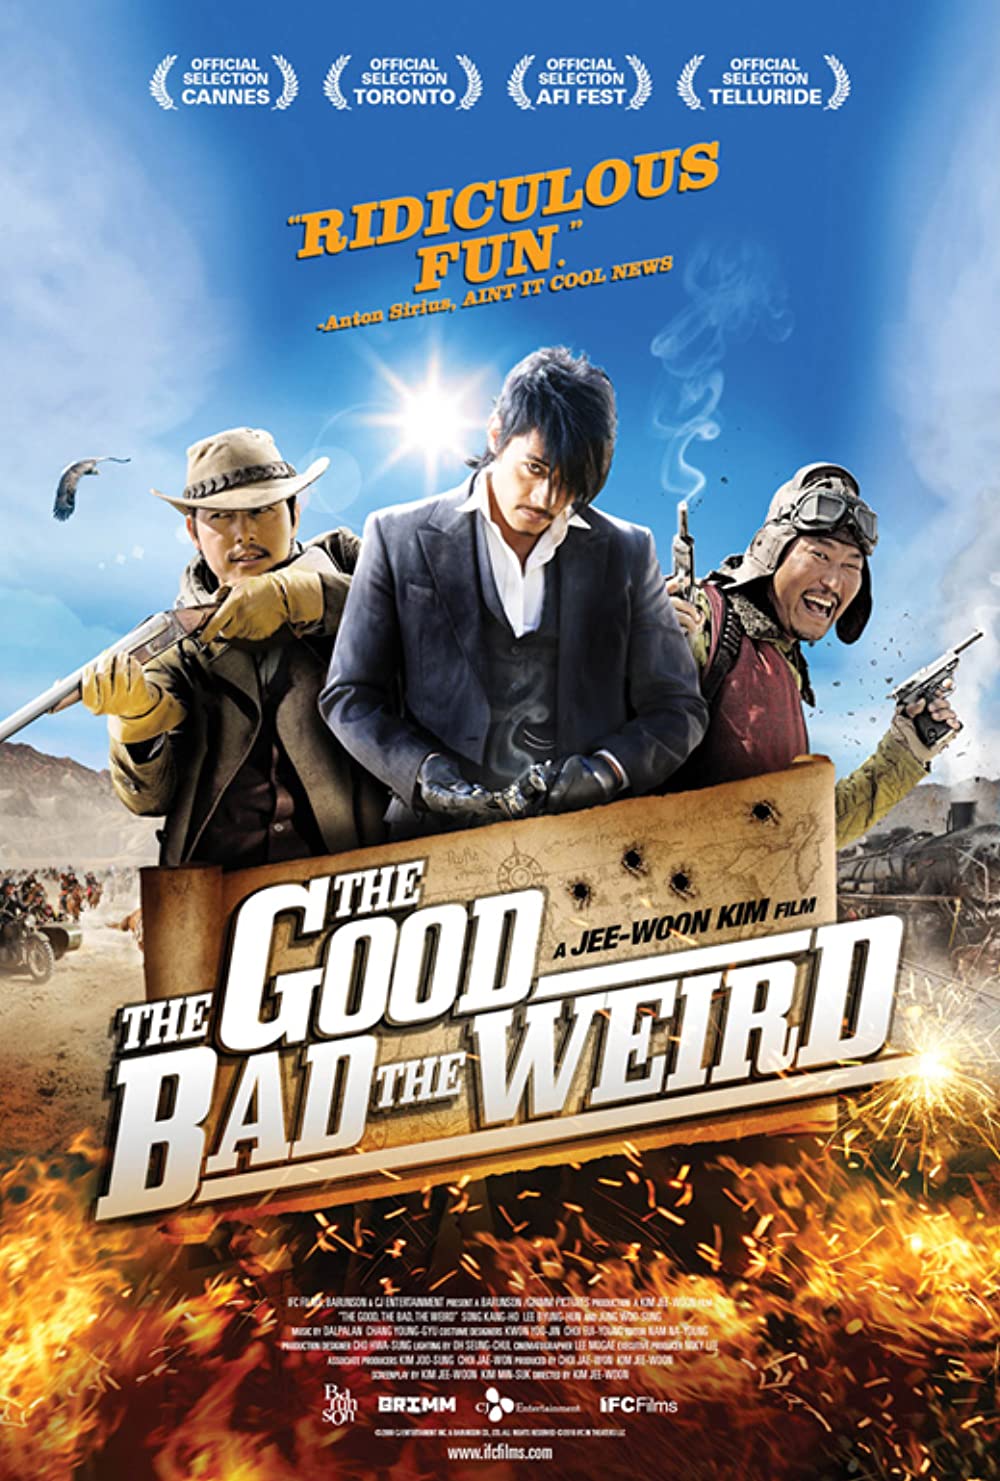 Poster phim The Good, The Bad, The Weird (Ảnh: Internet)